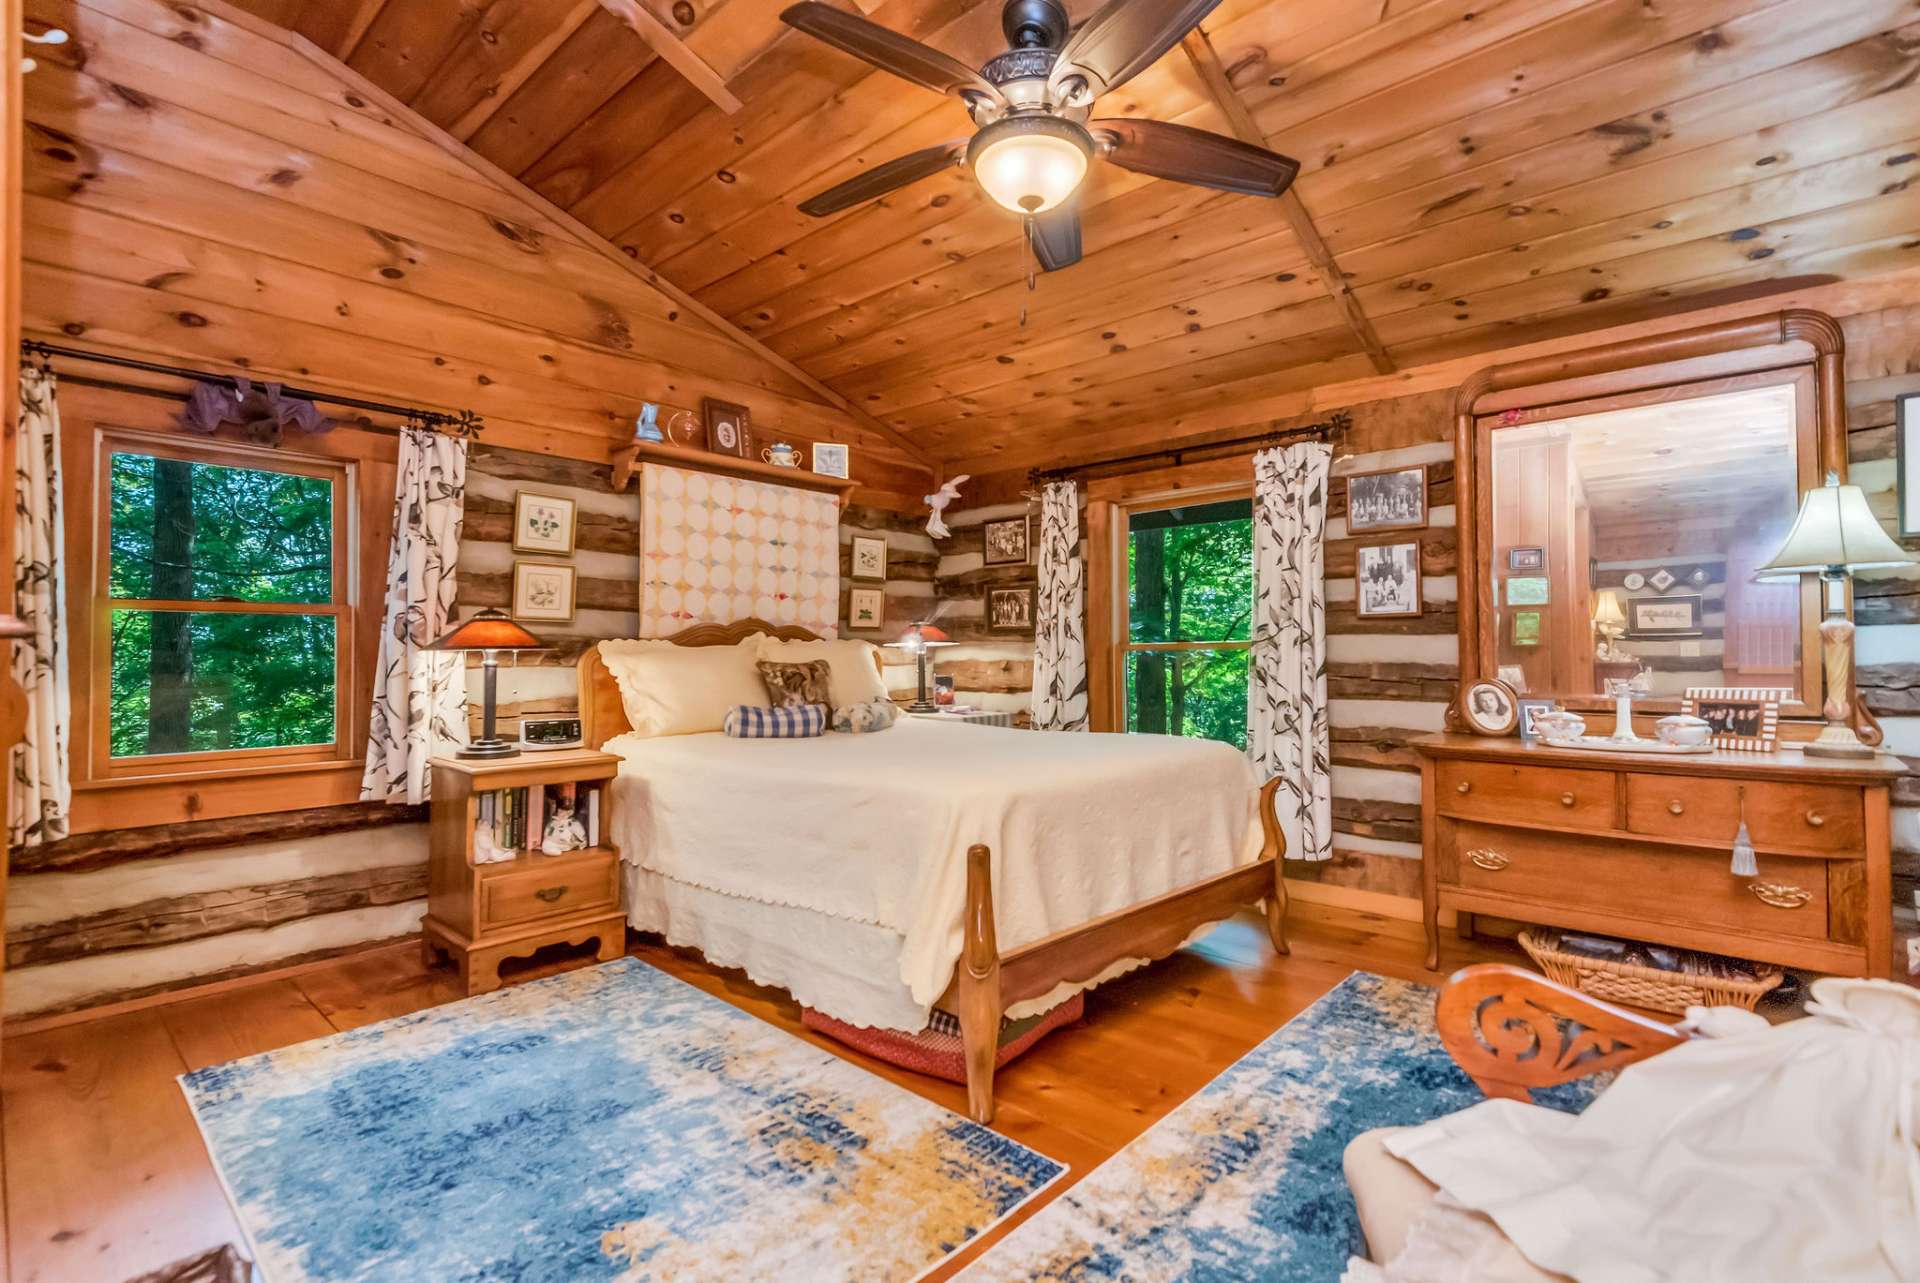 Upstairs in the loft bedroom, your guests will love feeling like they are sleeping in a tree house.